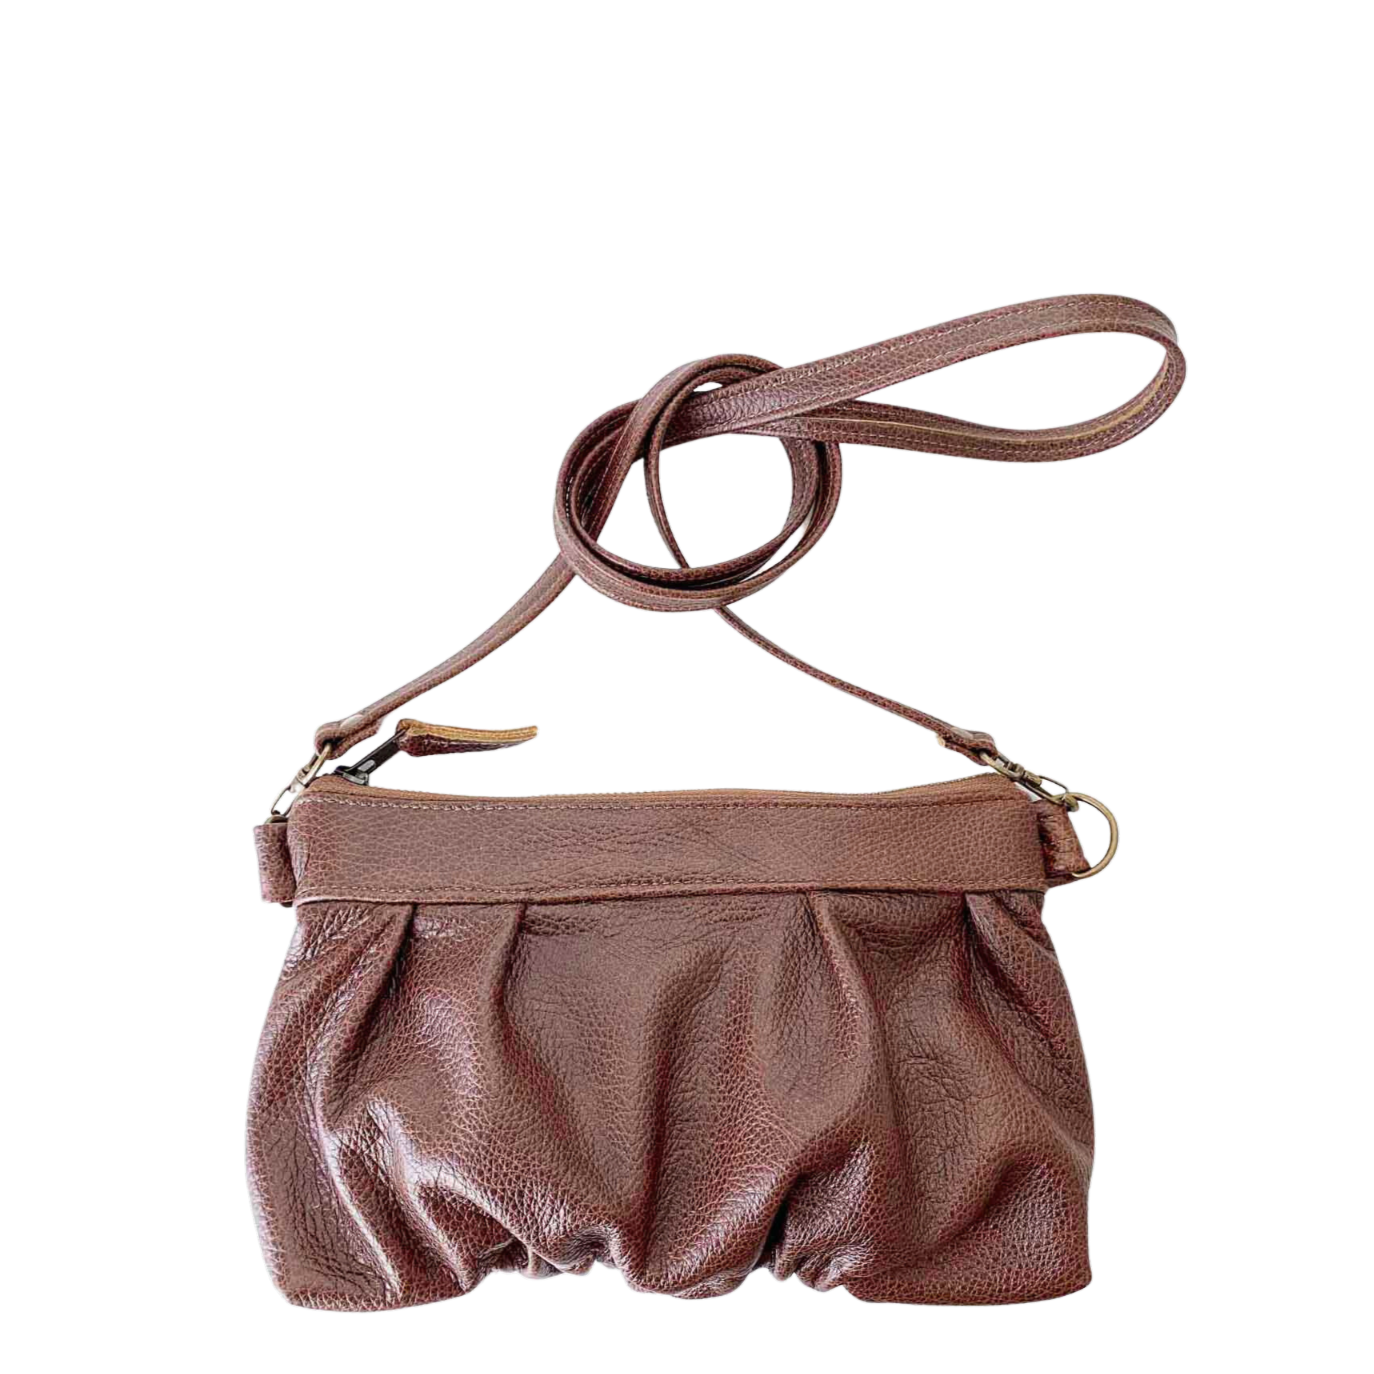 Ruche Clutch in Chestnut brown fullgrain cowskin leather with beautiful pleated detail and crossbody strap